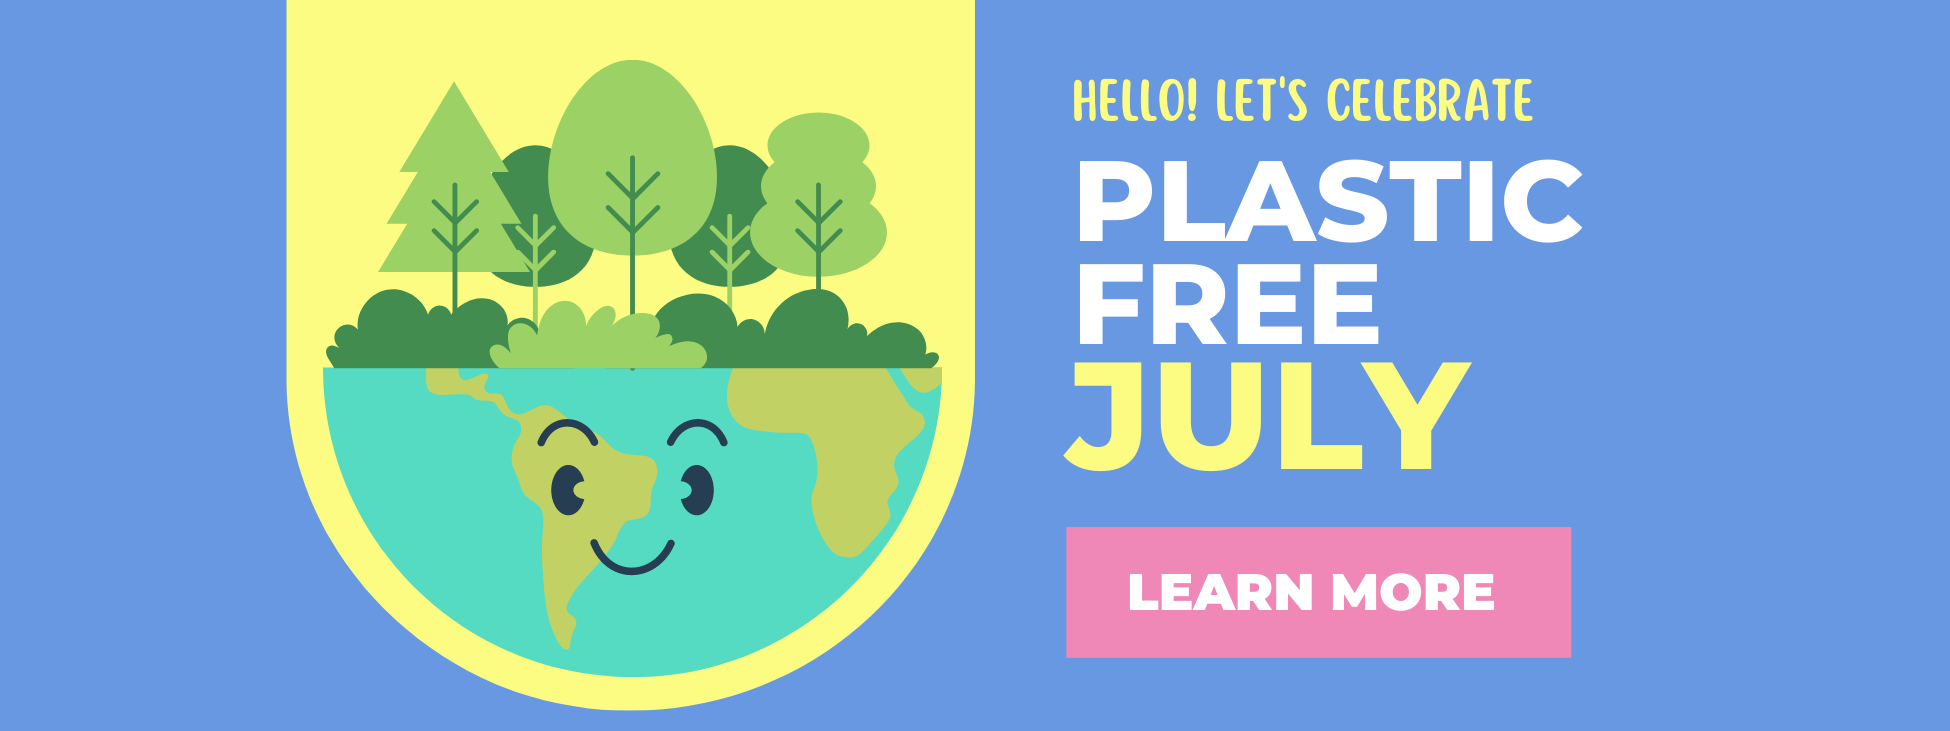 Celebrate PLASTIC FREE JULY with Wrappily